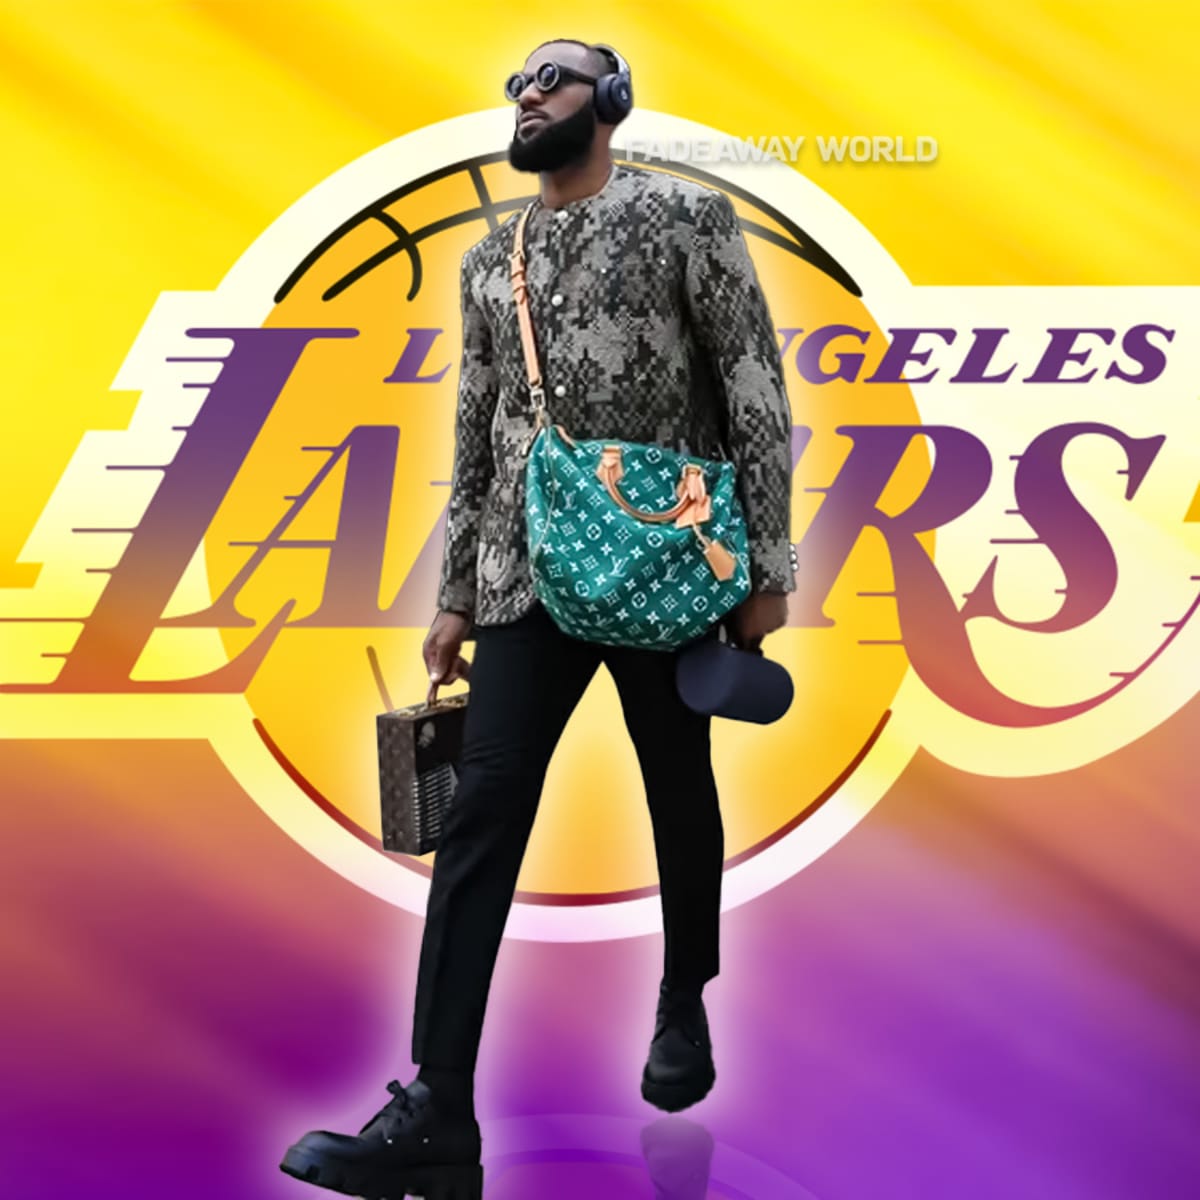 LeBron James wears $28K Louis Vuitton outfit for NBA opening night